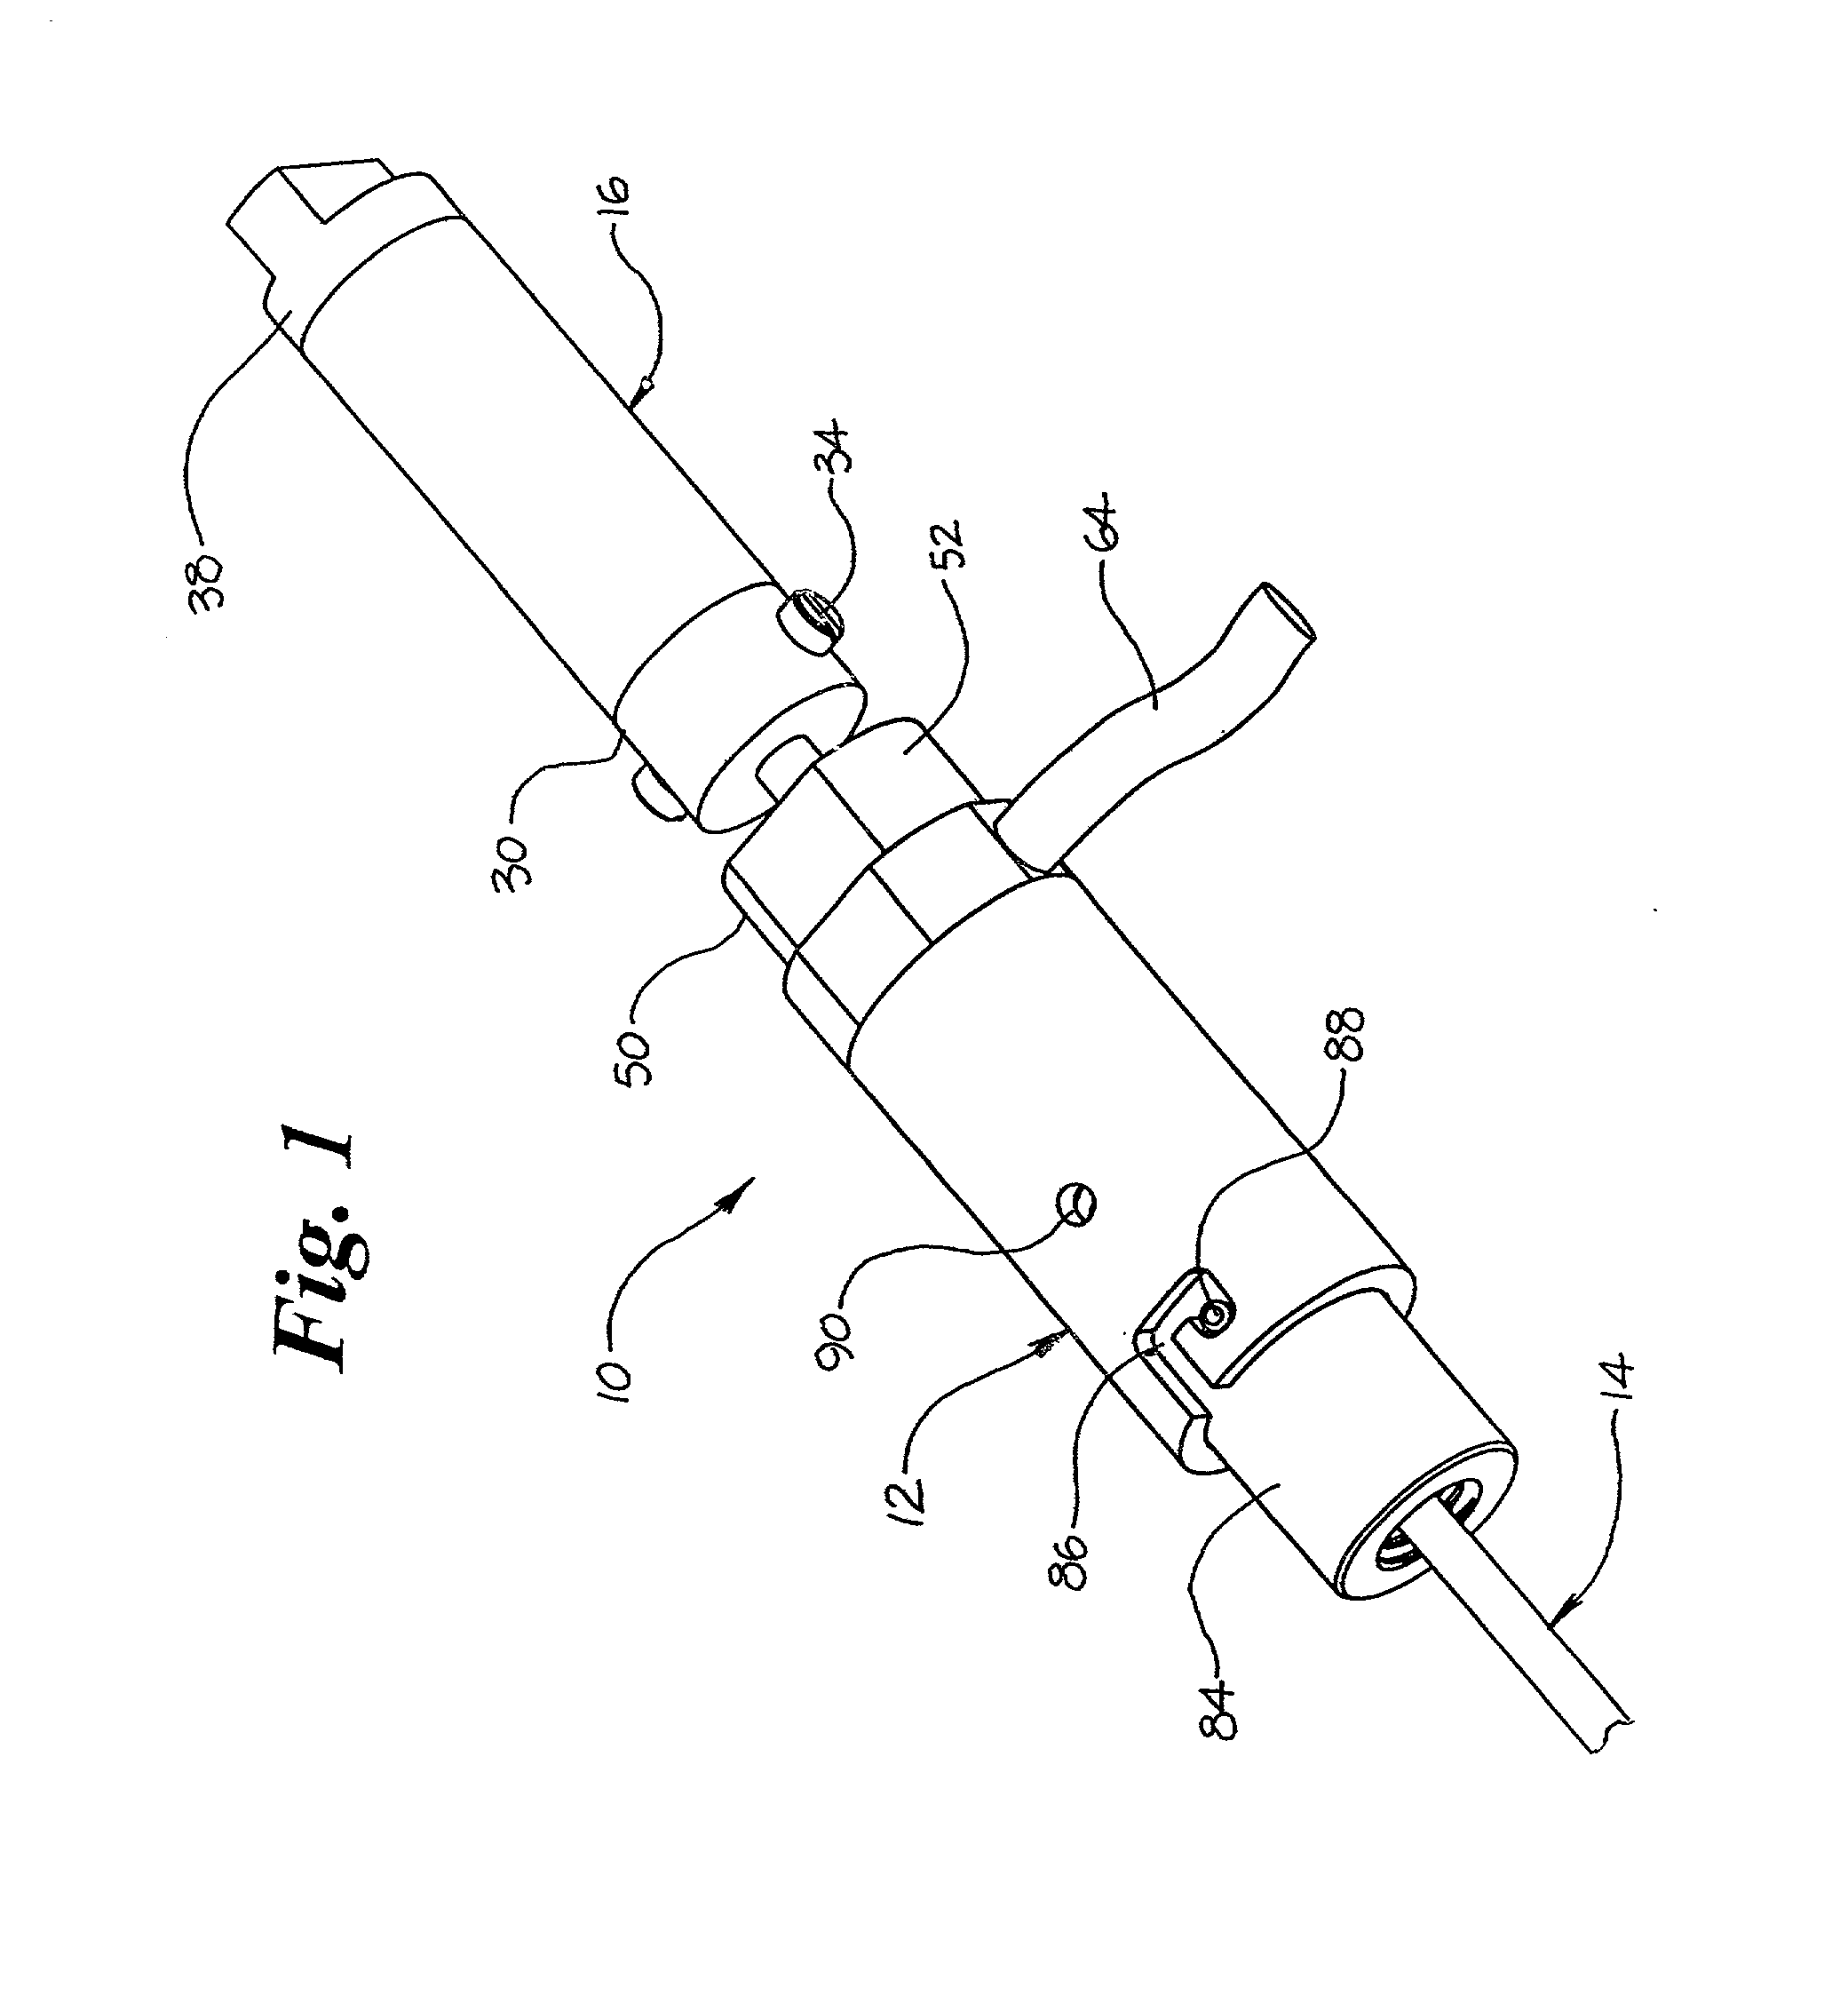 Device for inserting fill material particles into body cavities